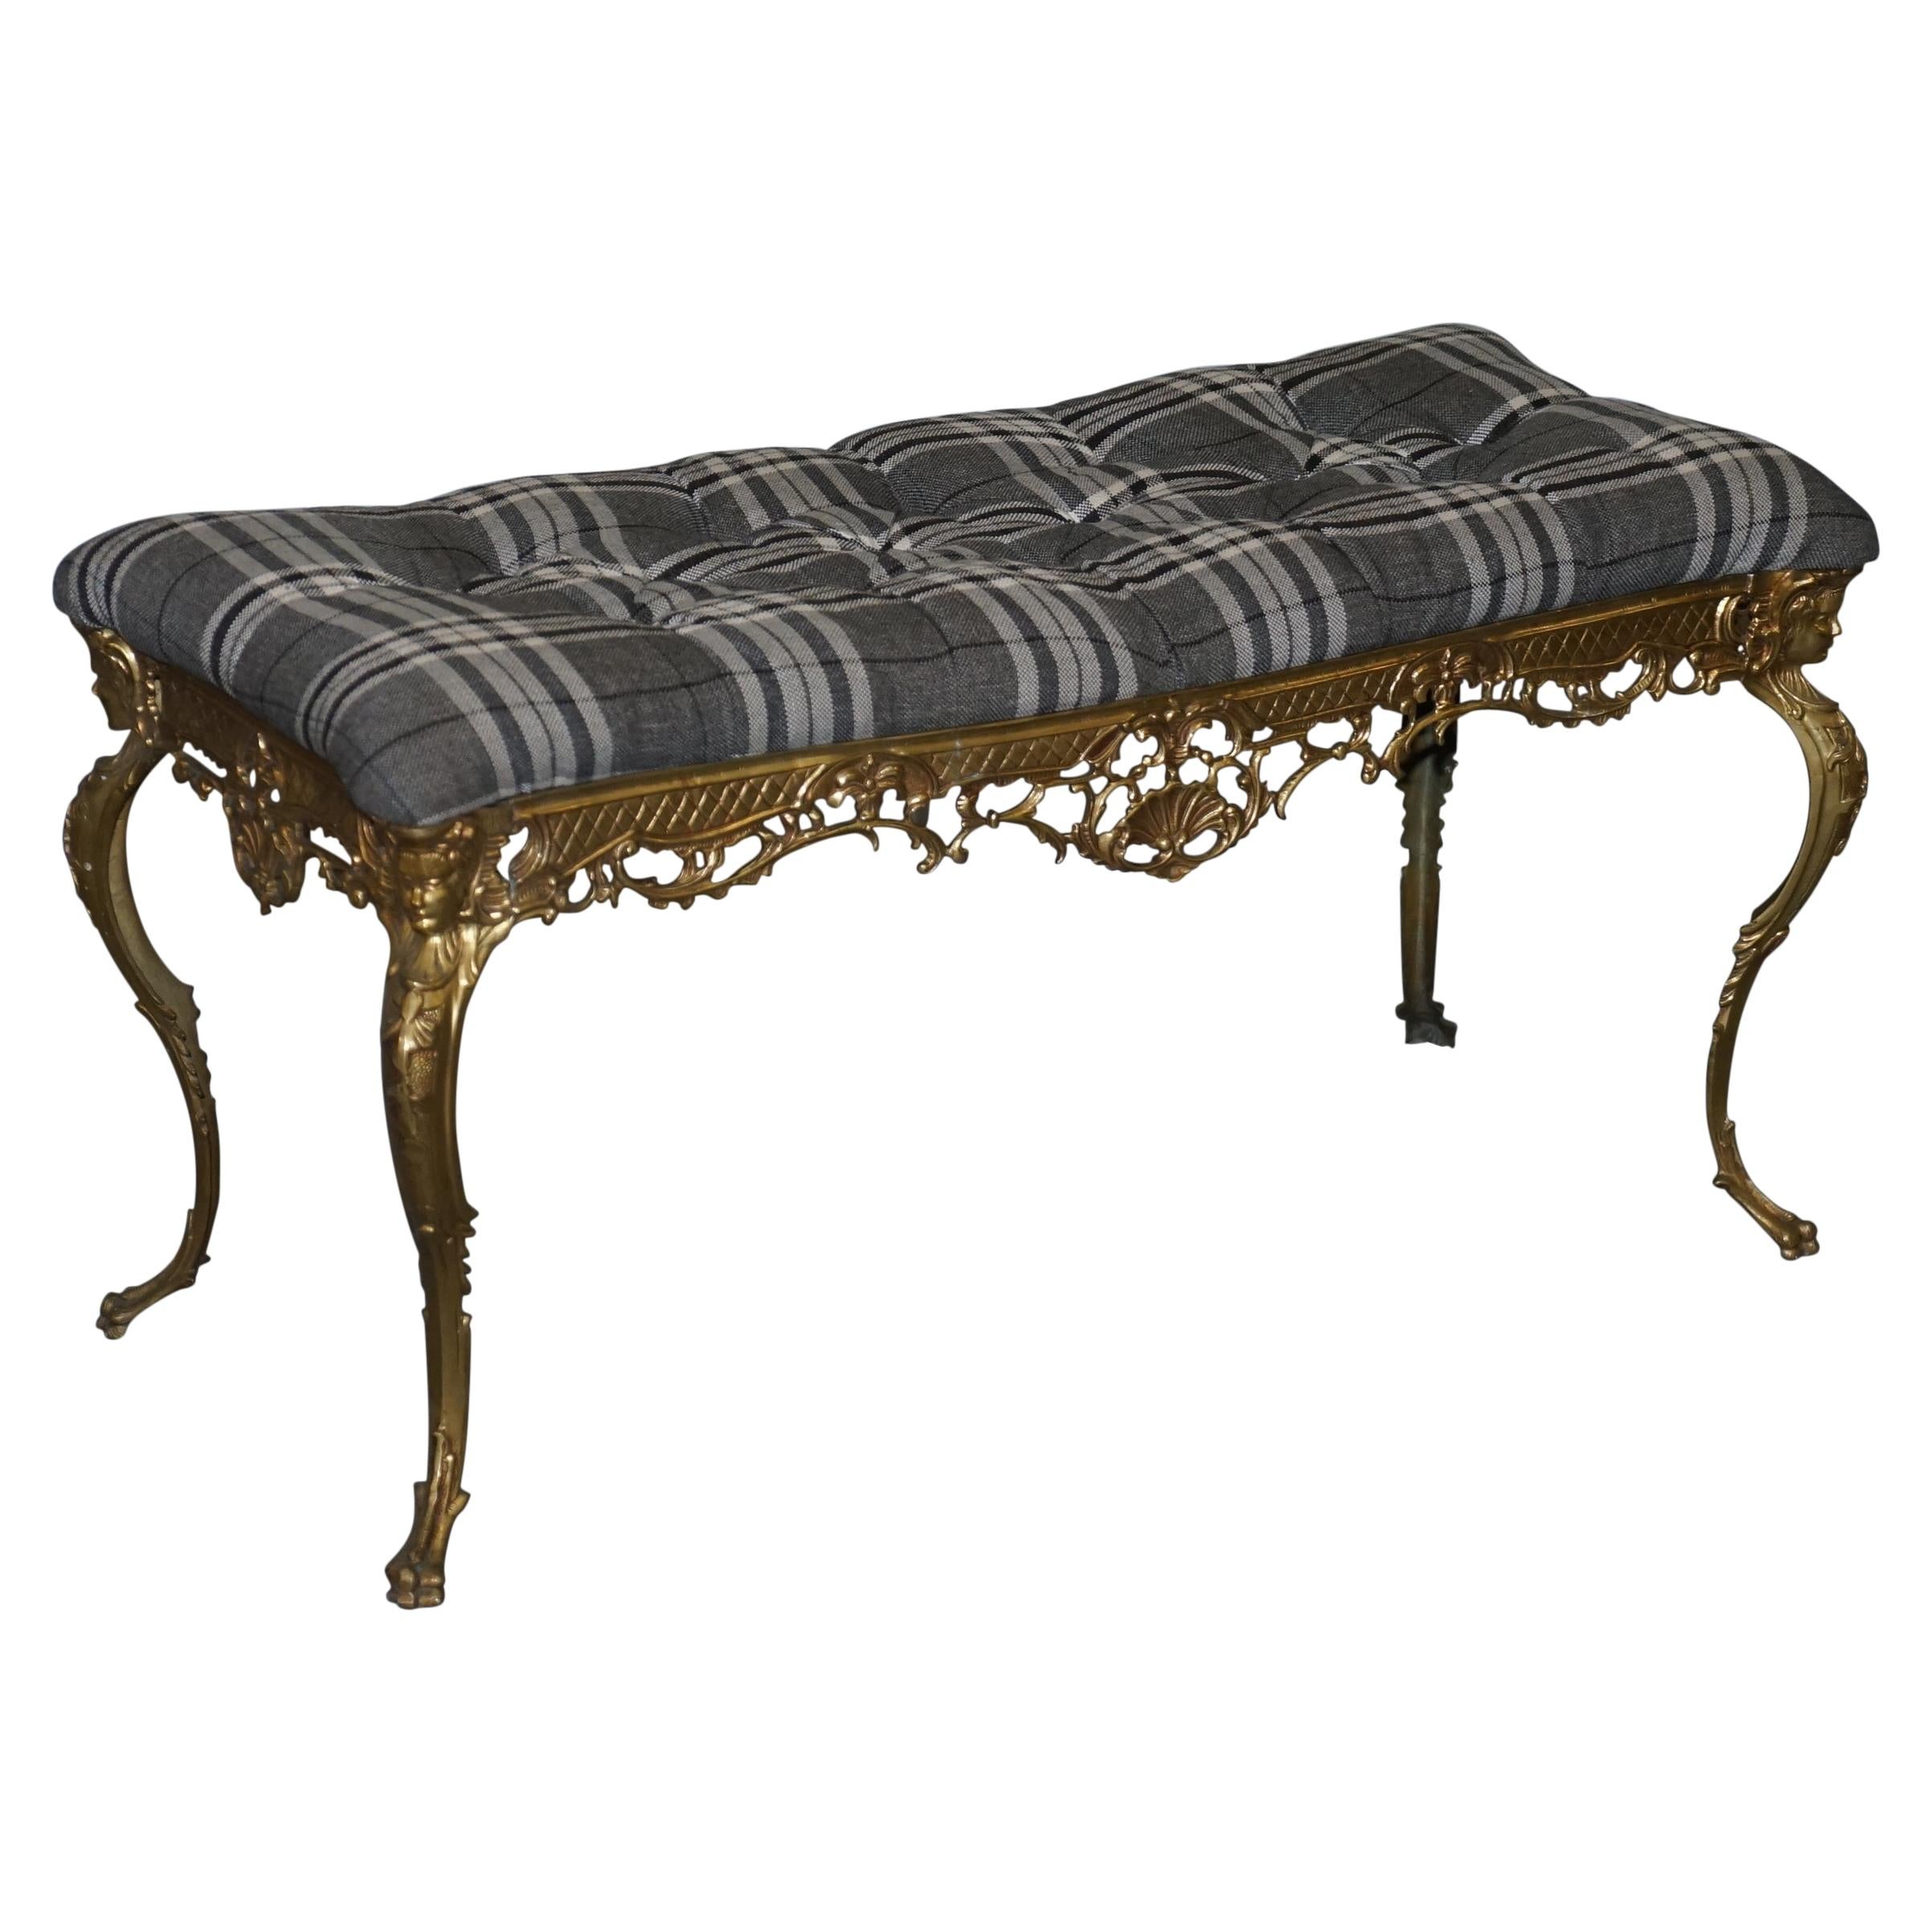 Ornate French circa 1920s Gold Gilt Brass Bench New Chesterfield Upholstery